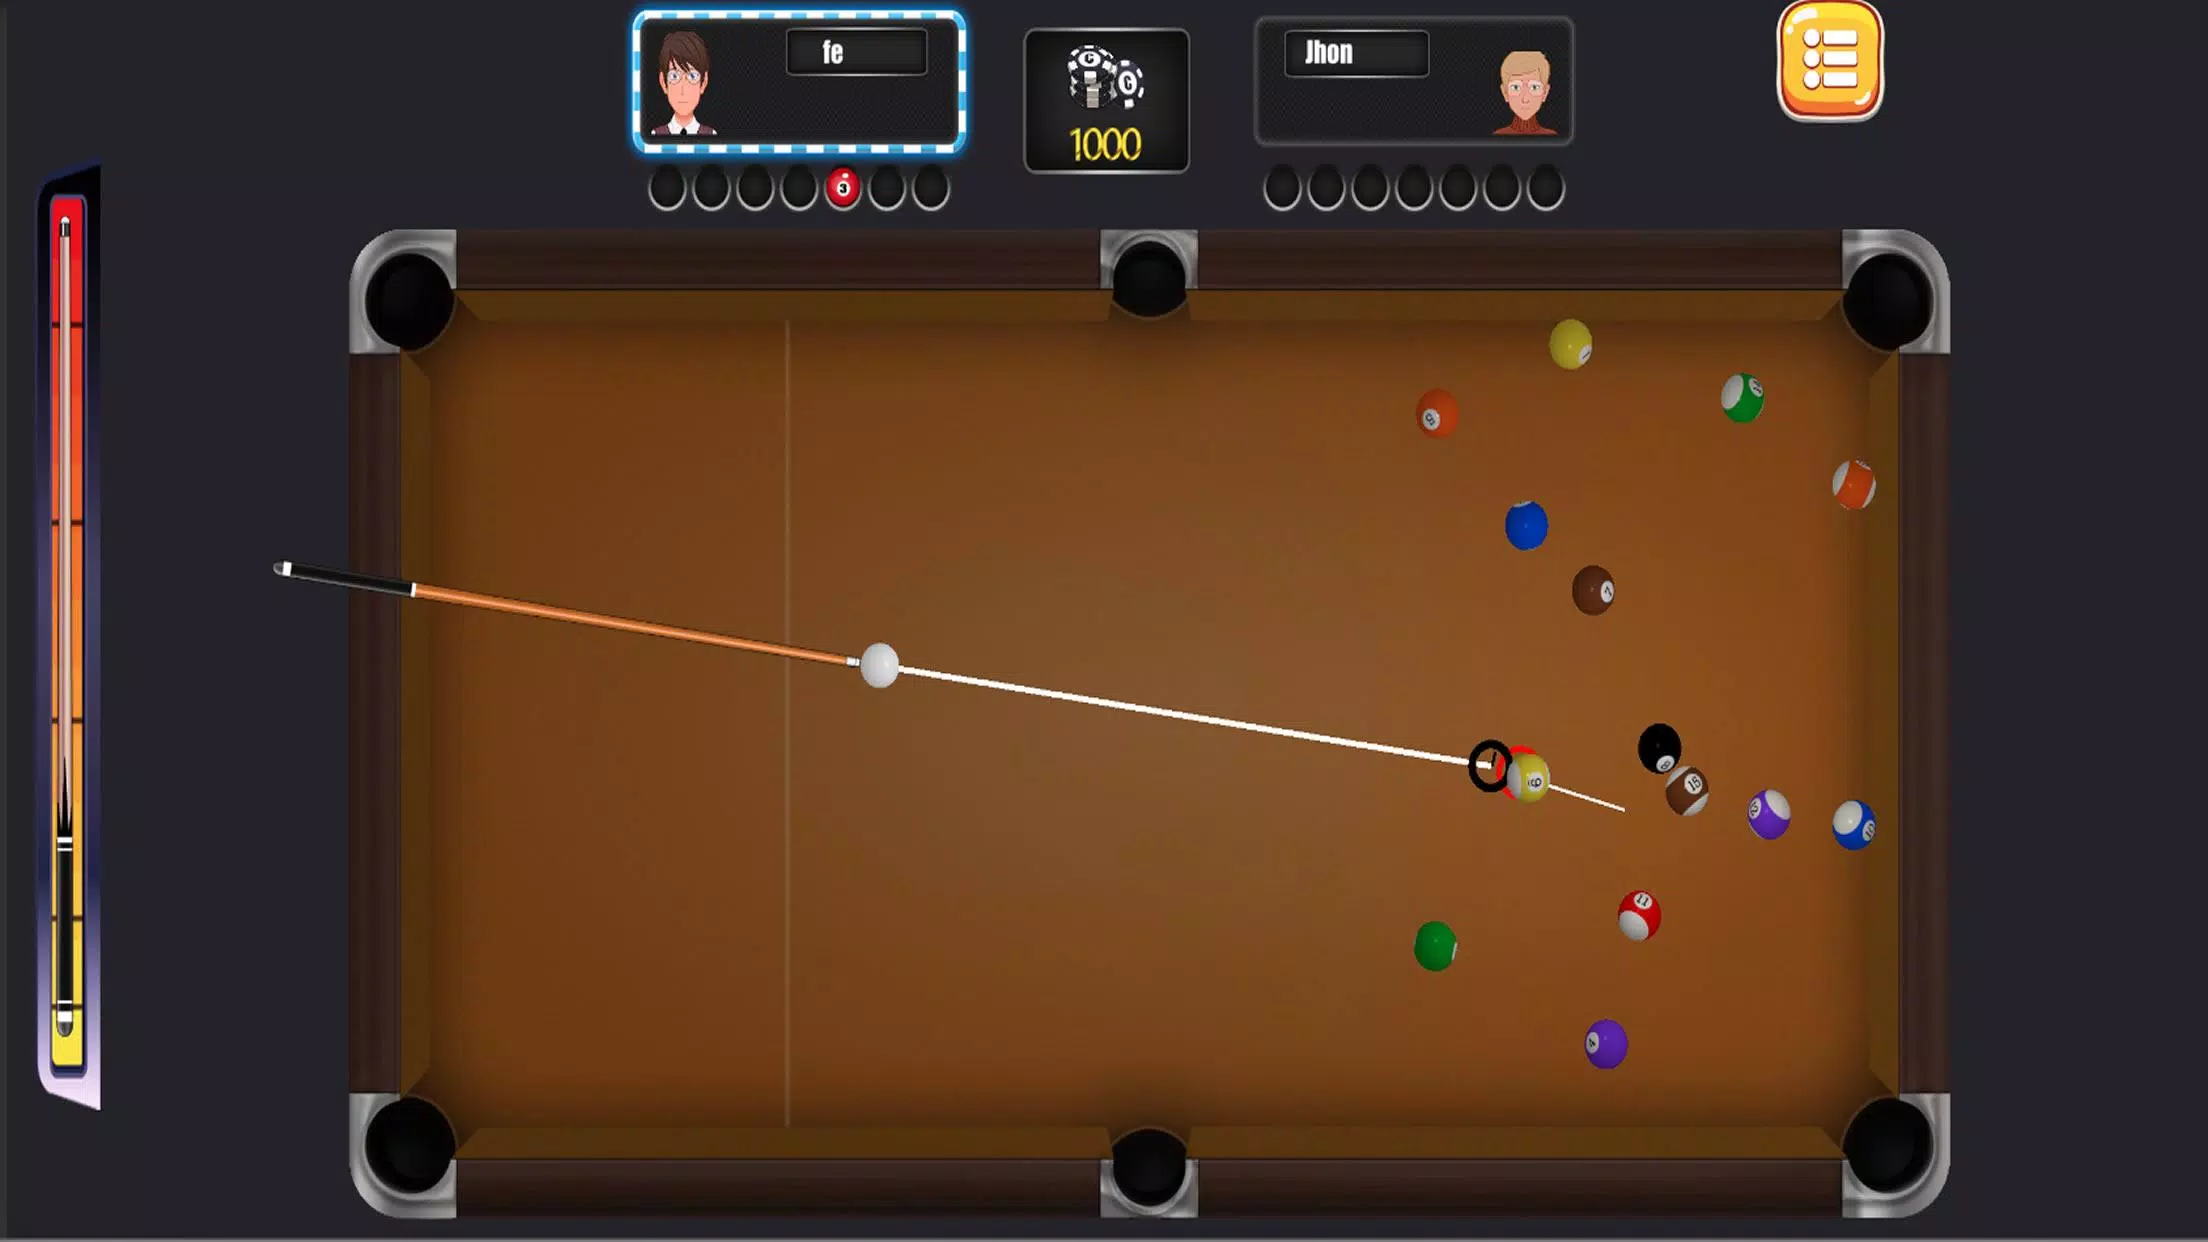 Billiard 8 Stars Pro Live Online: free pool games APK for Android Download